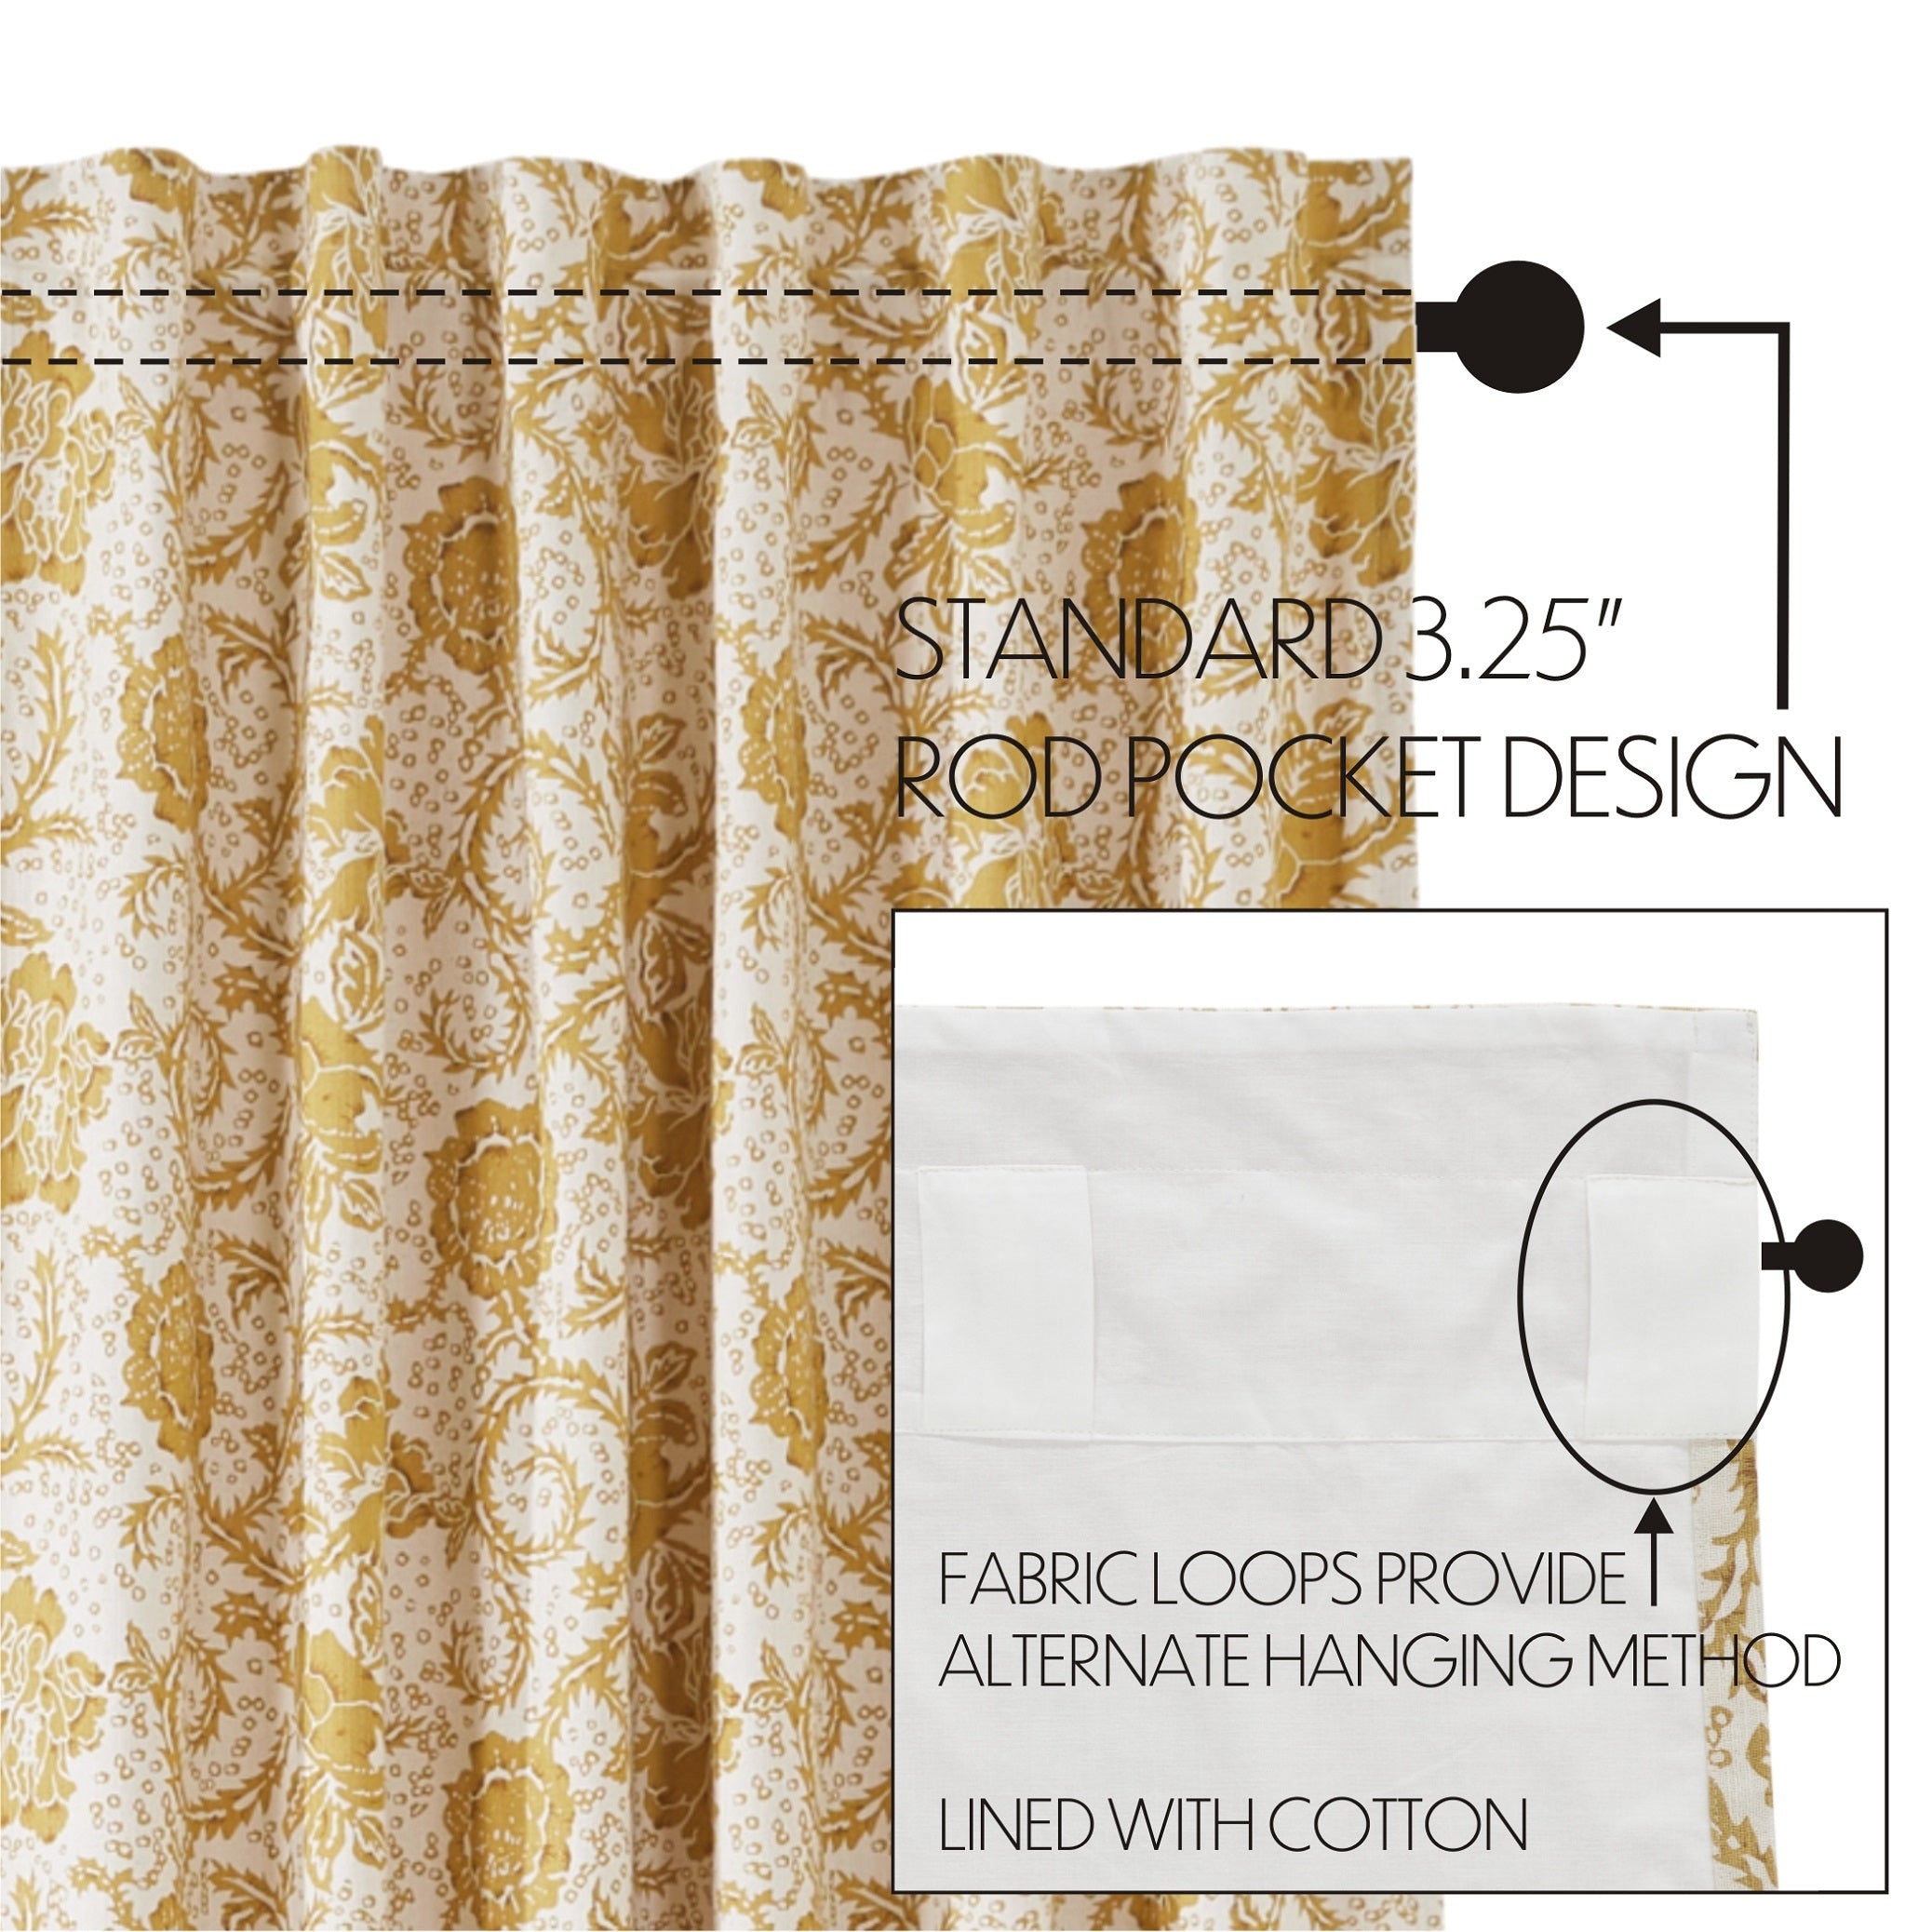 Dorset Gold Floral Panel Curtain 96"x50" VHC Brands